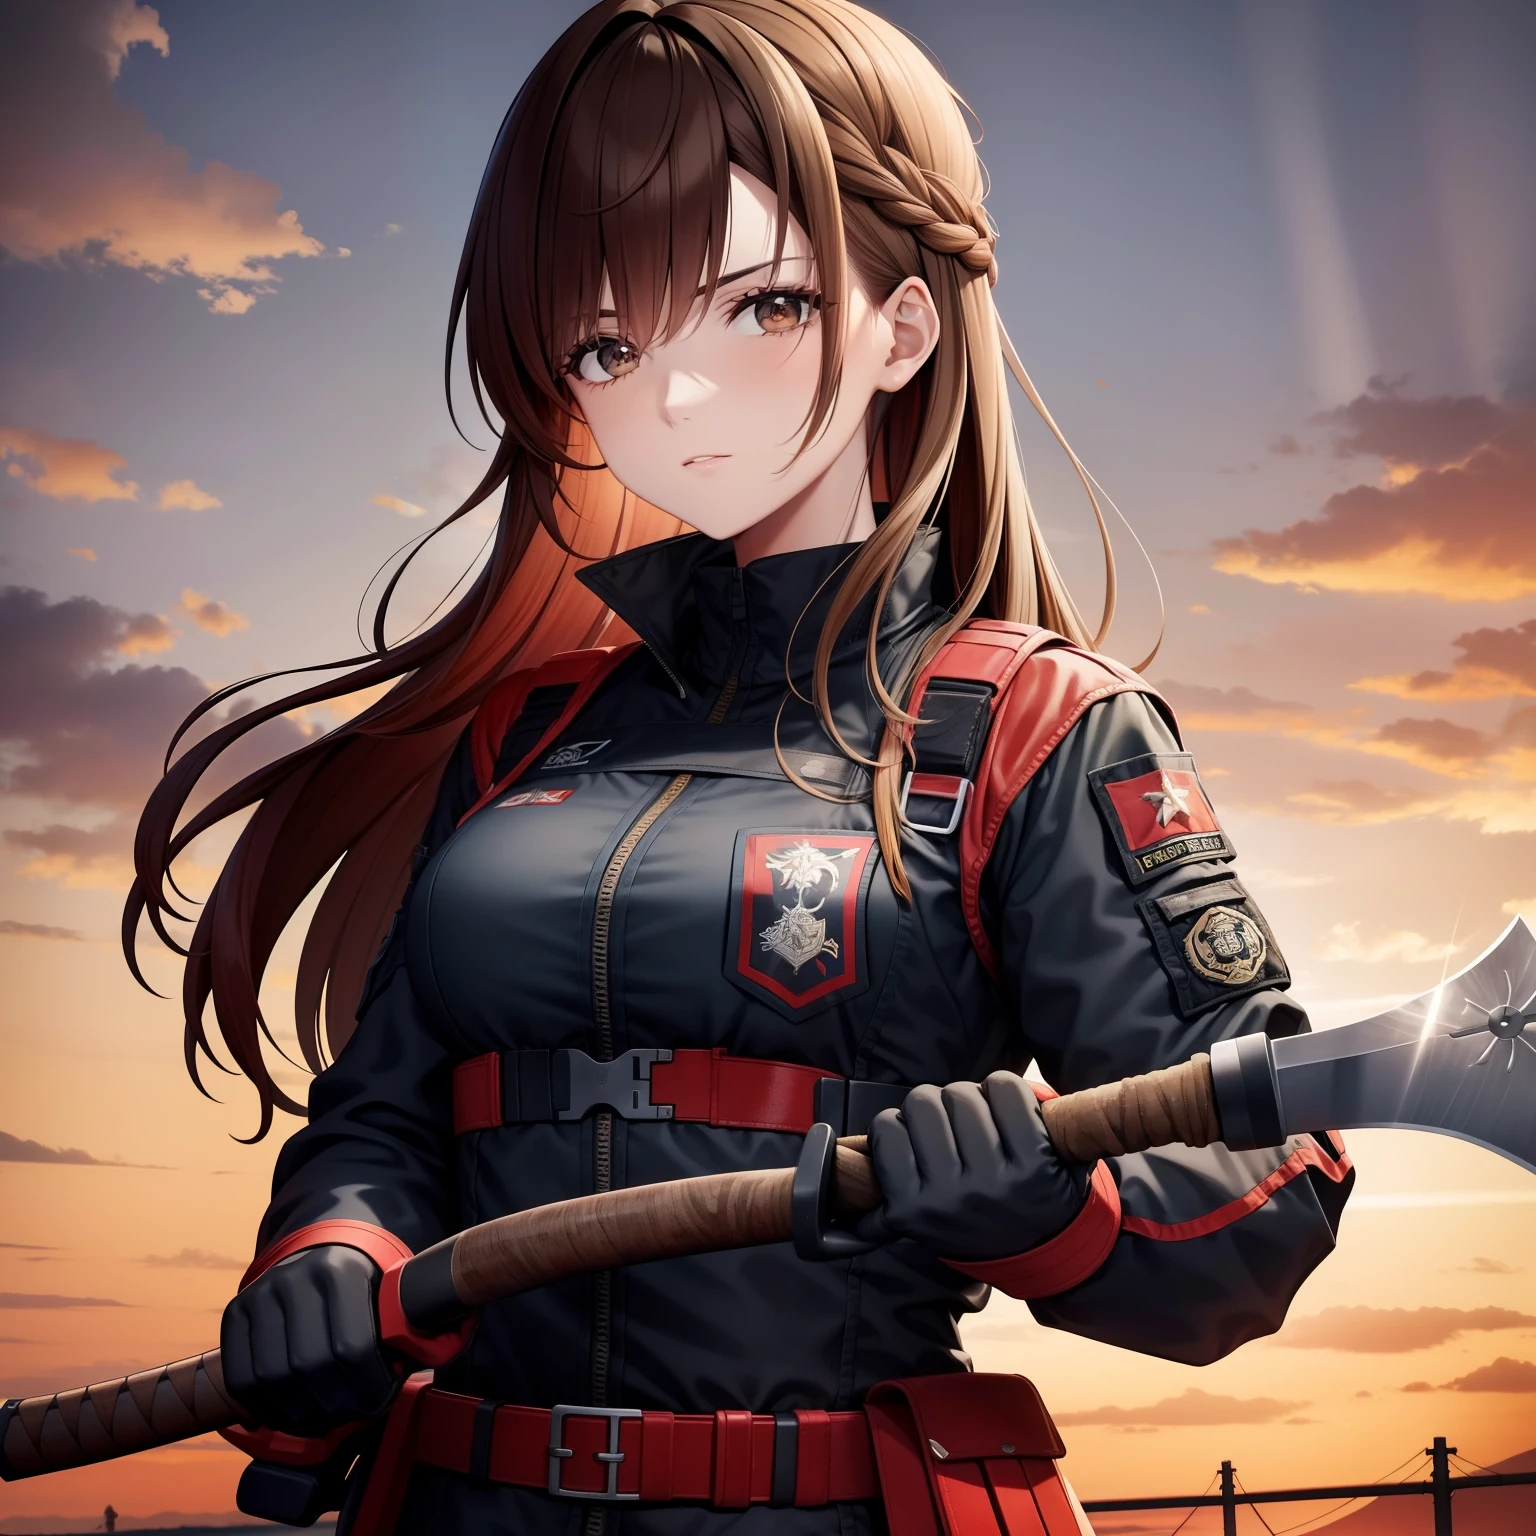 Petite woman, brown hair and eye color, wearing tactical military clothing, holding an axe with red details on the blade, red ax, holding axe